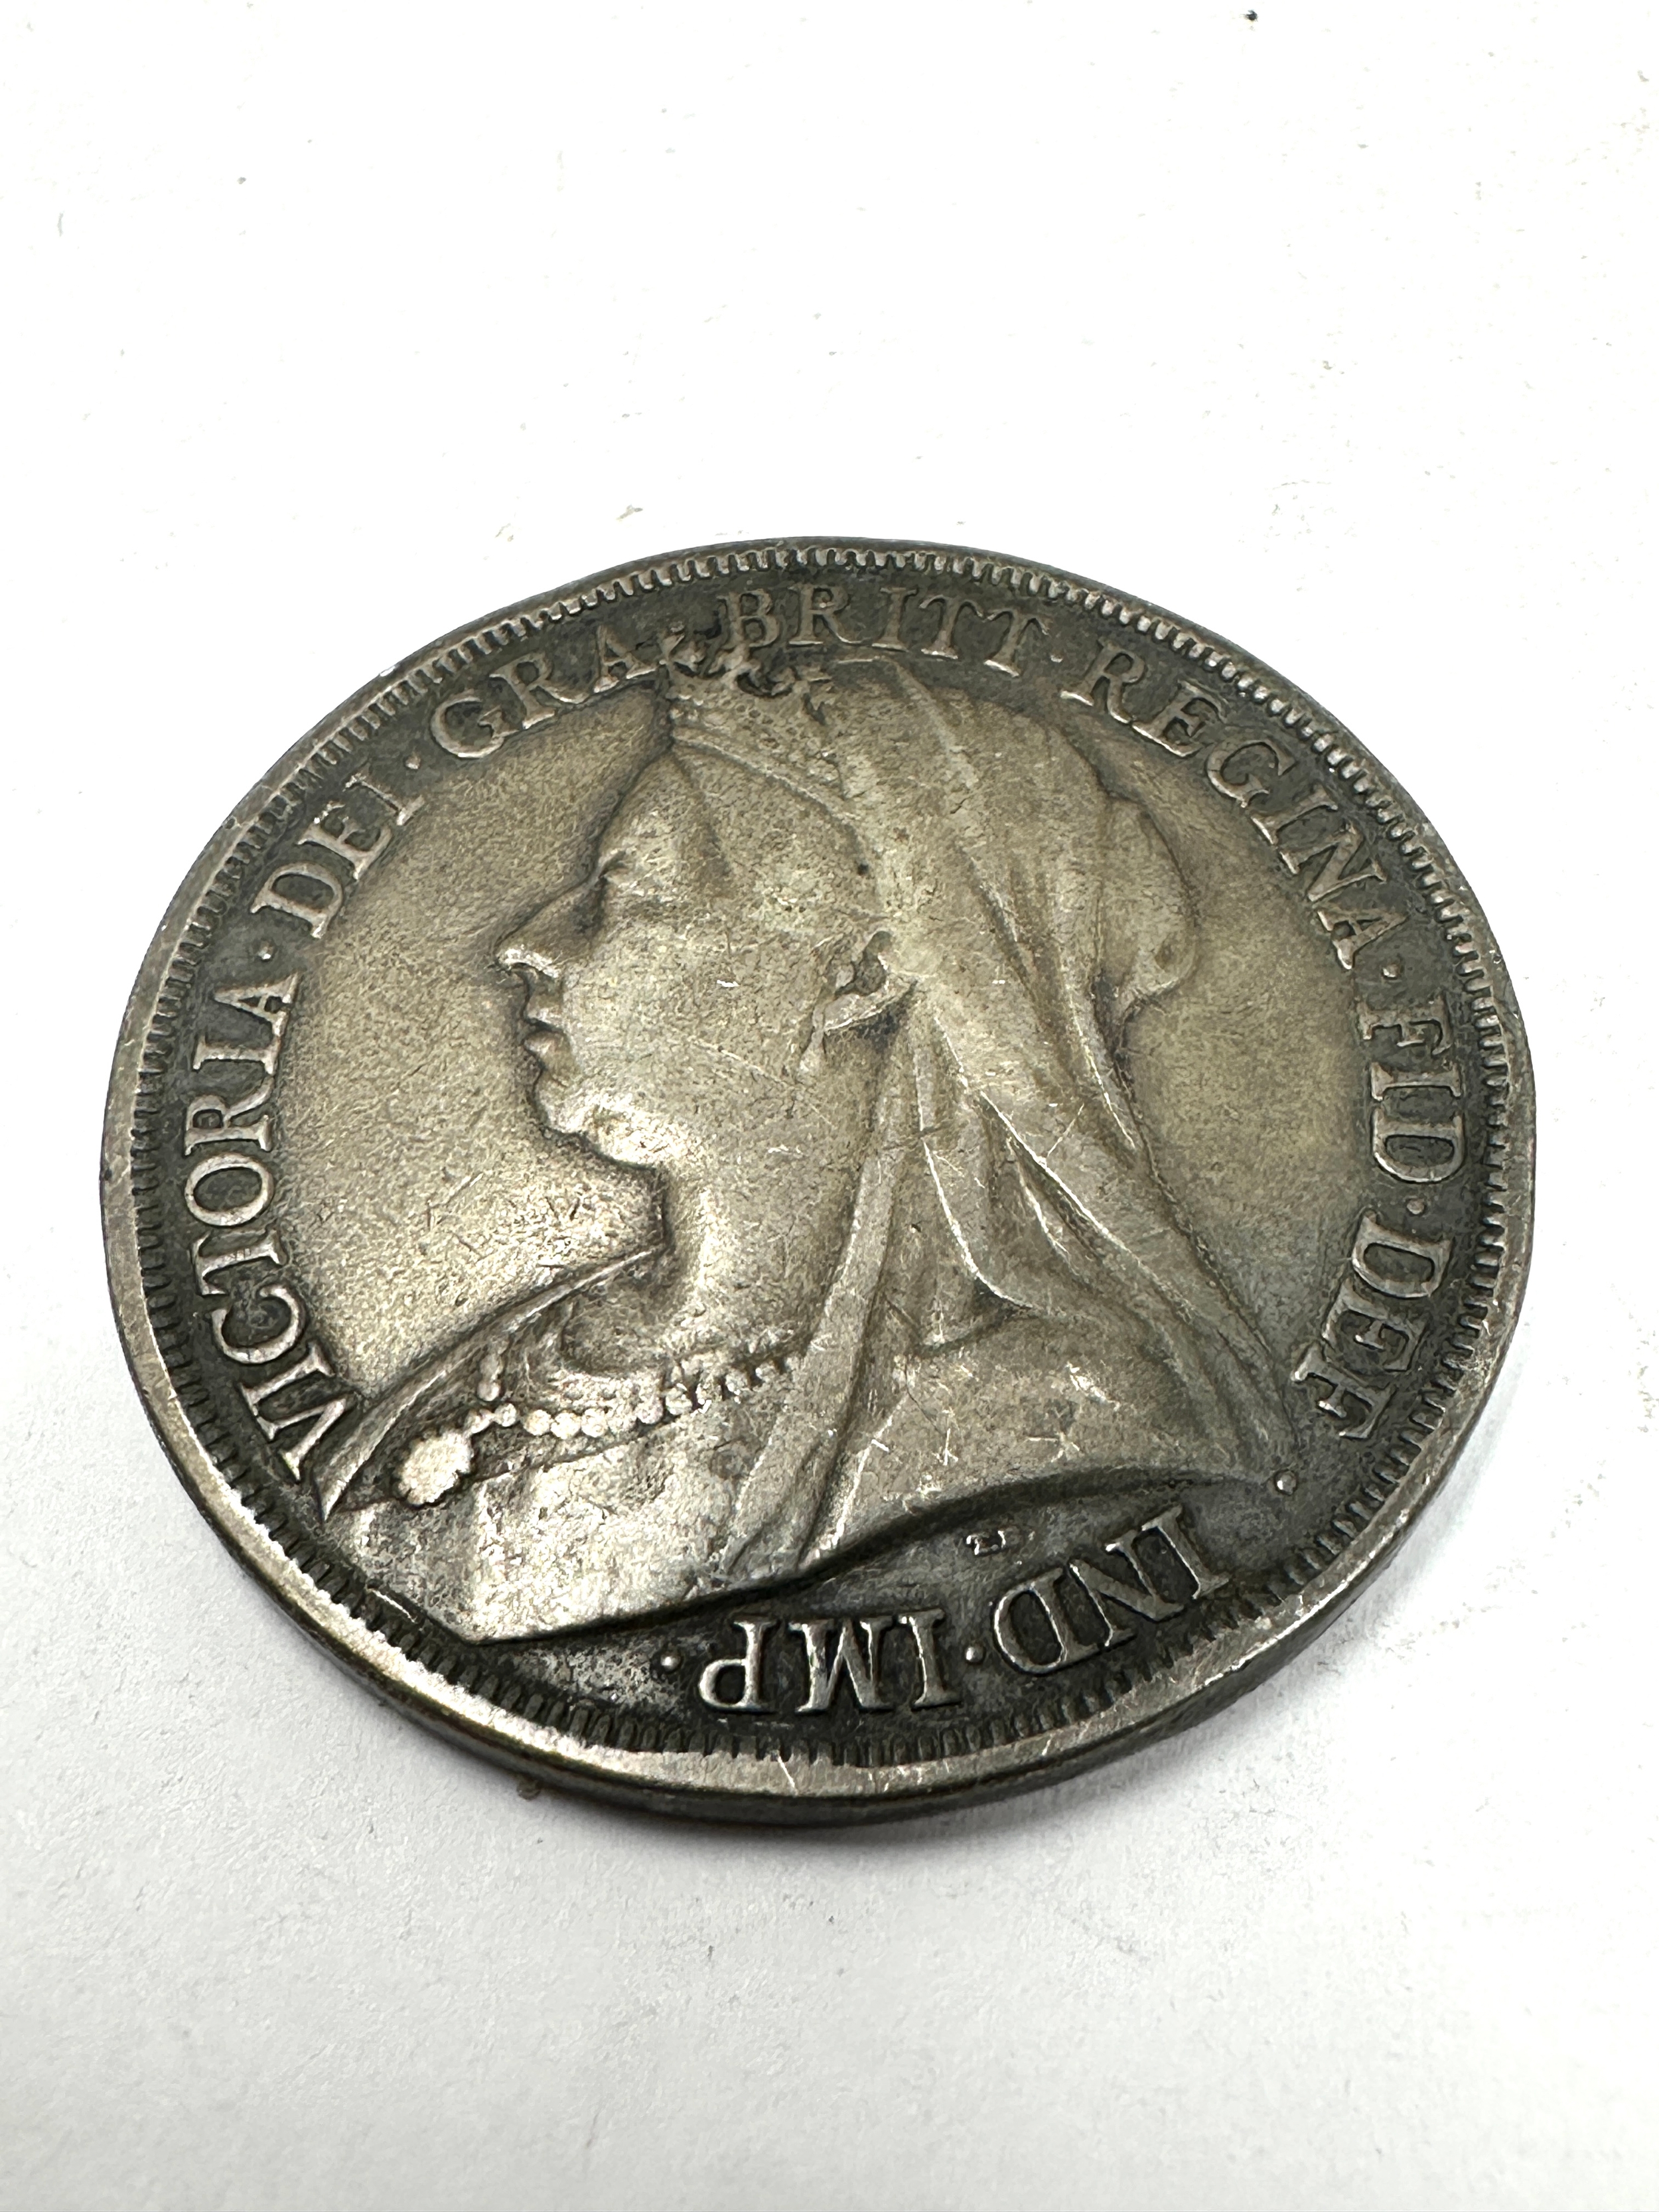 1893 Victorian silver crown - Image 2 of 2